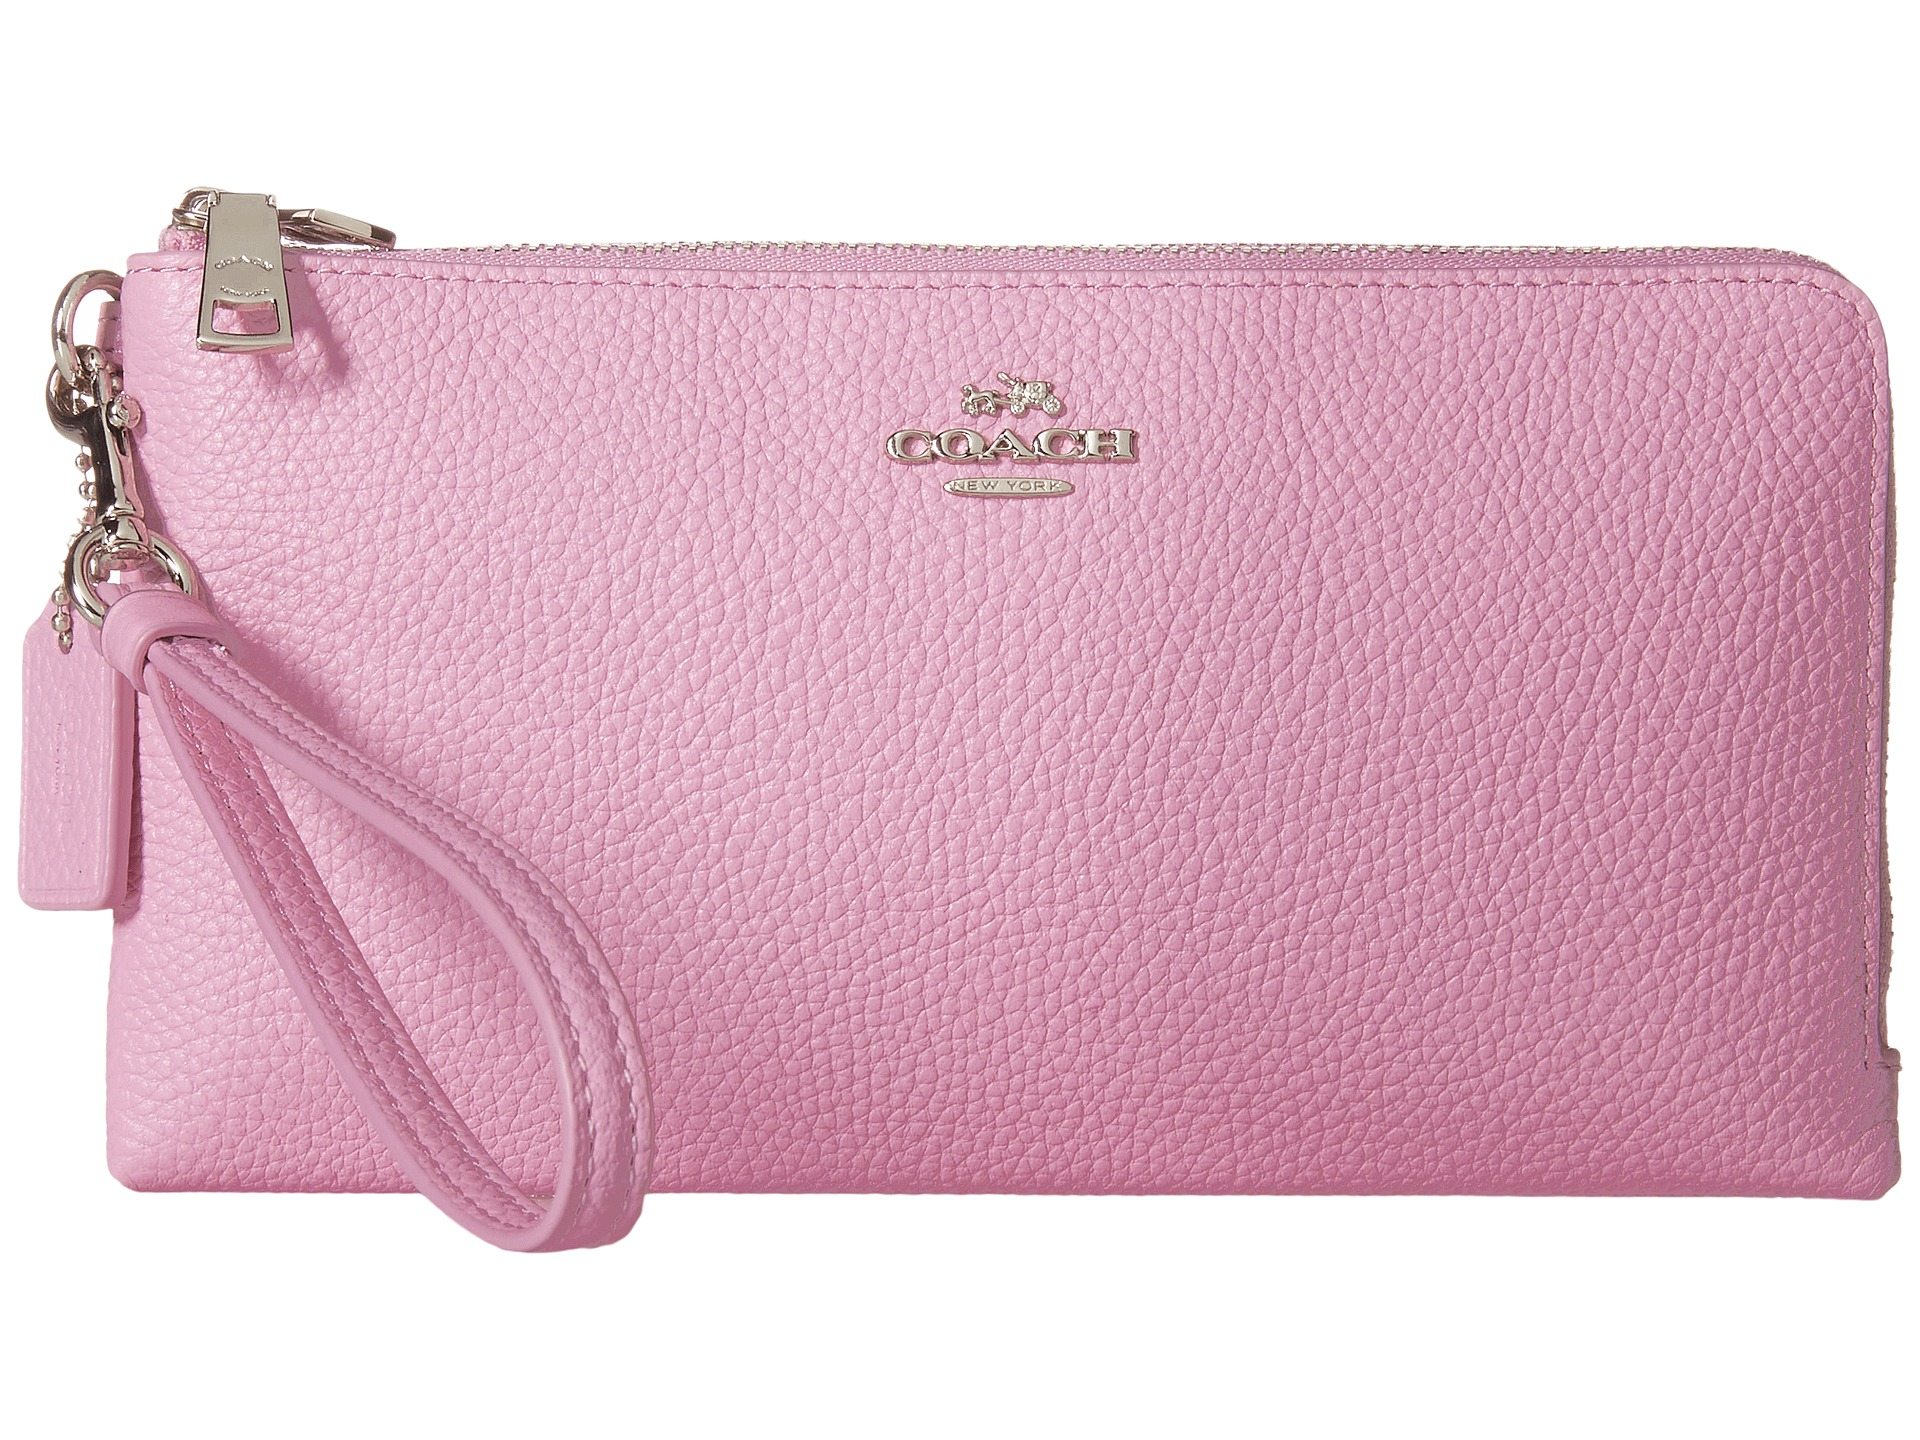 Lyst - Coach Polished Pebbled Leather Double Zip Wallet in Pink